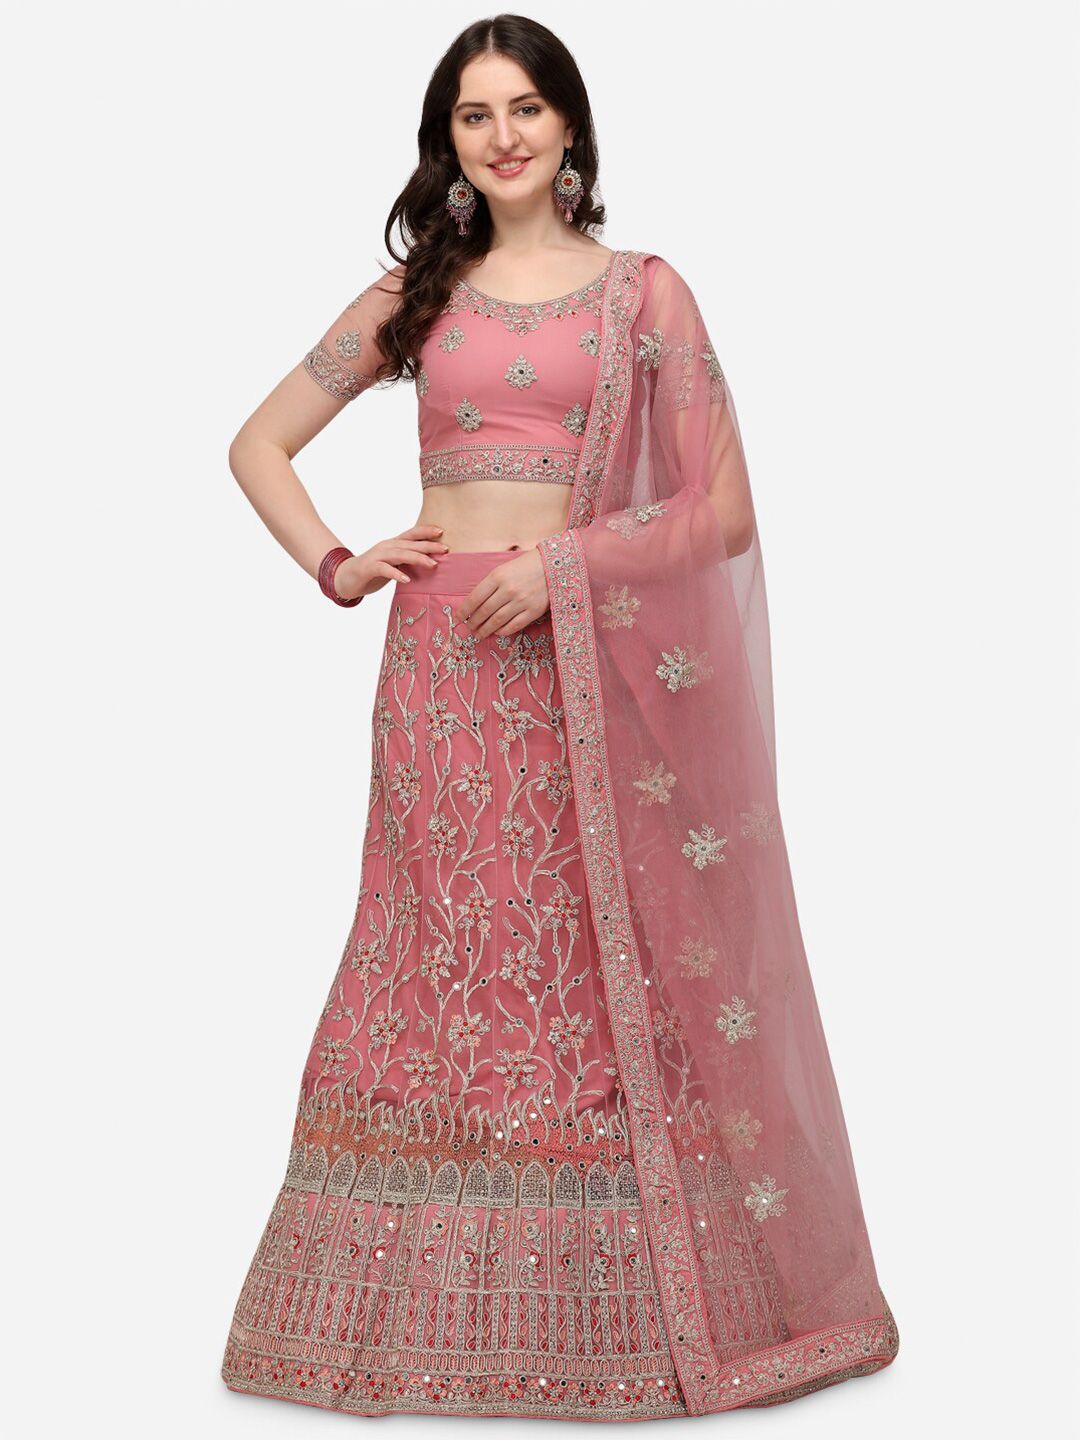 VRSALES Pink & Silver-Coloured Embroidered Semi-Stitched Lehenga & Blouse With Dupatta Price in India